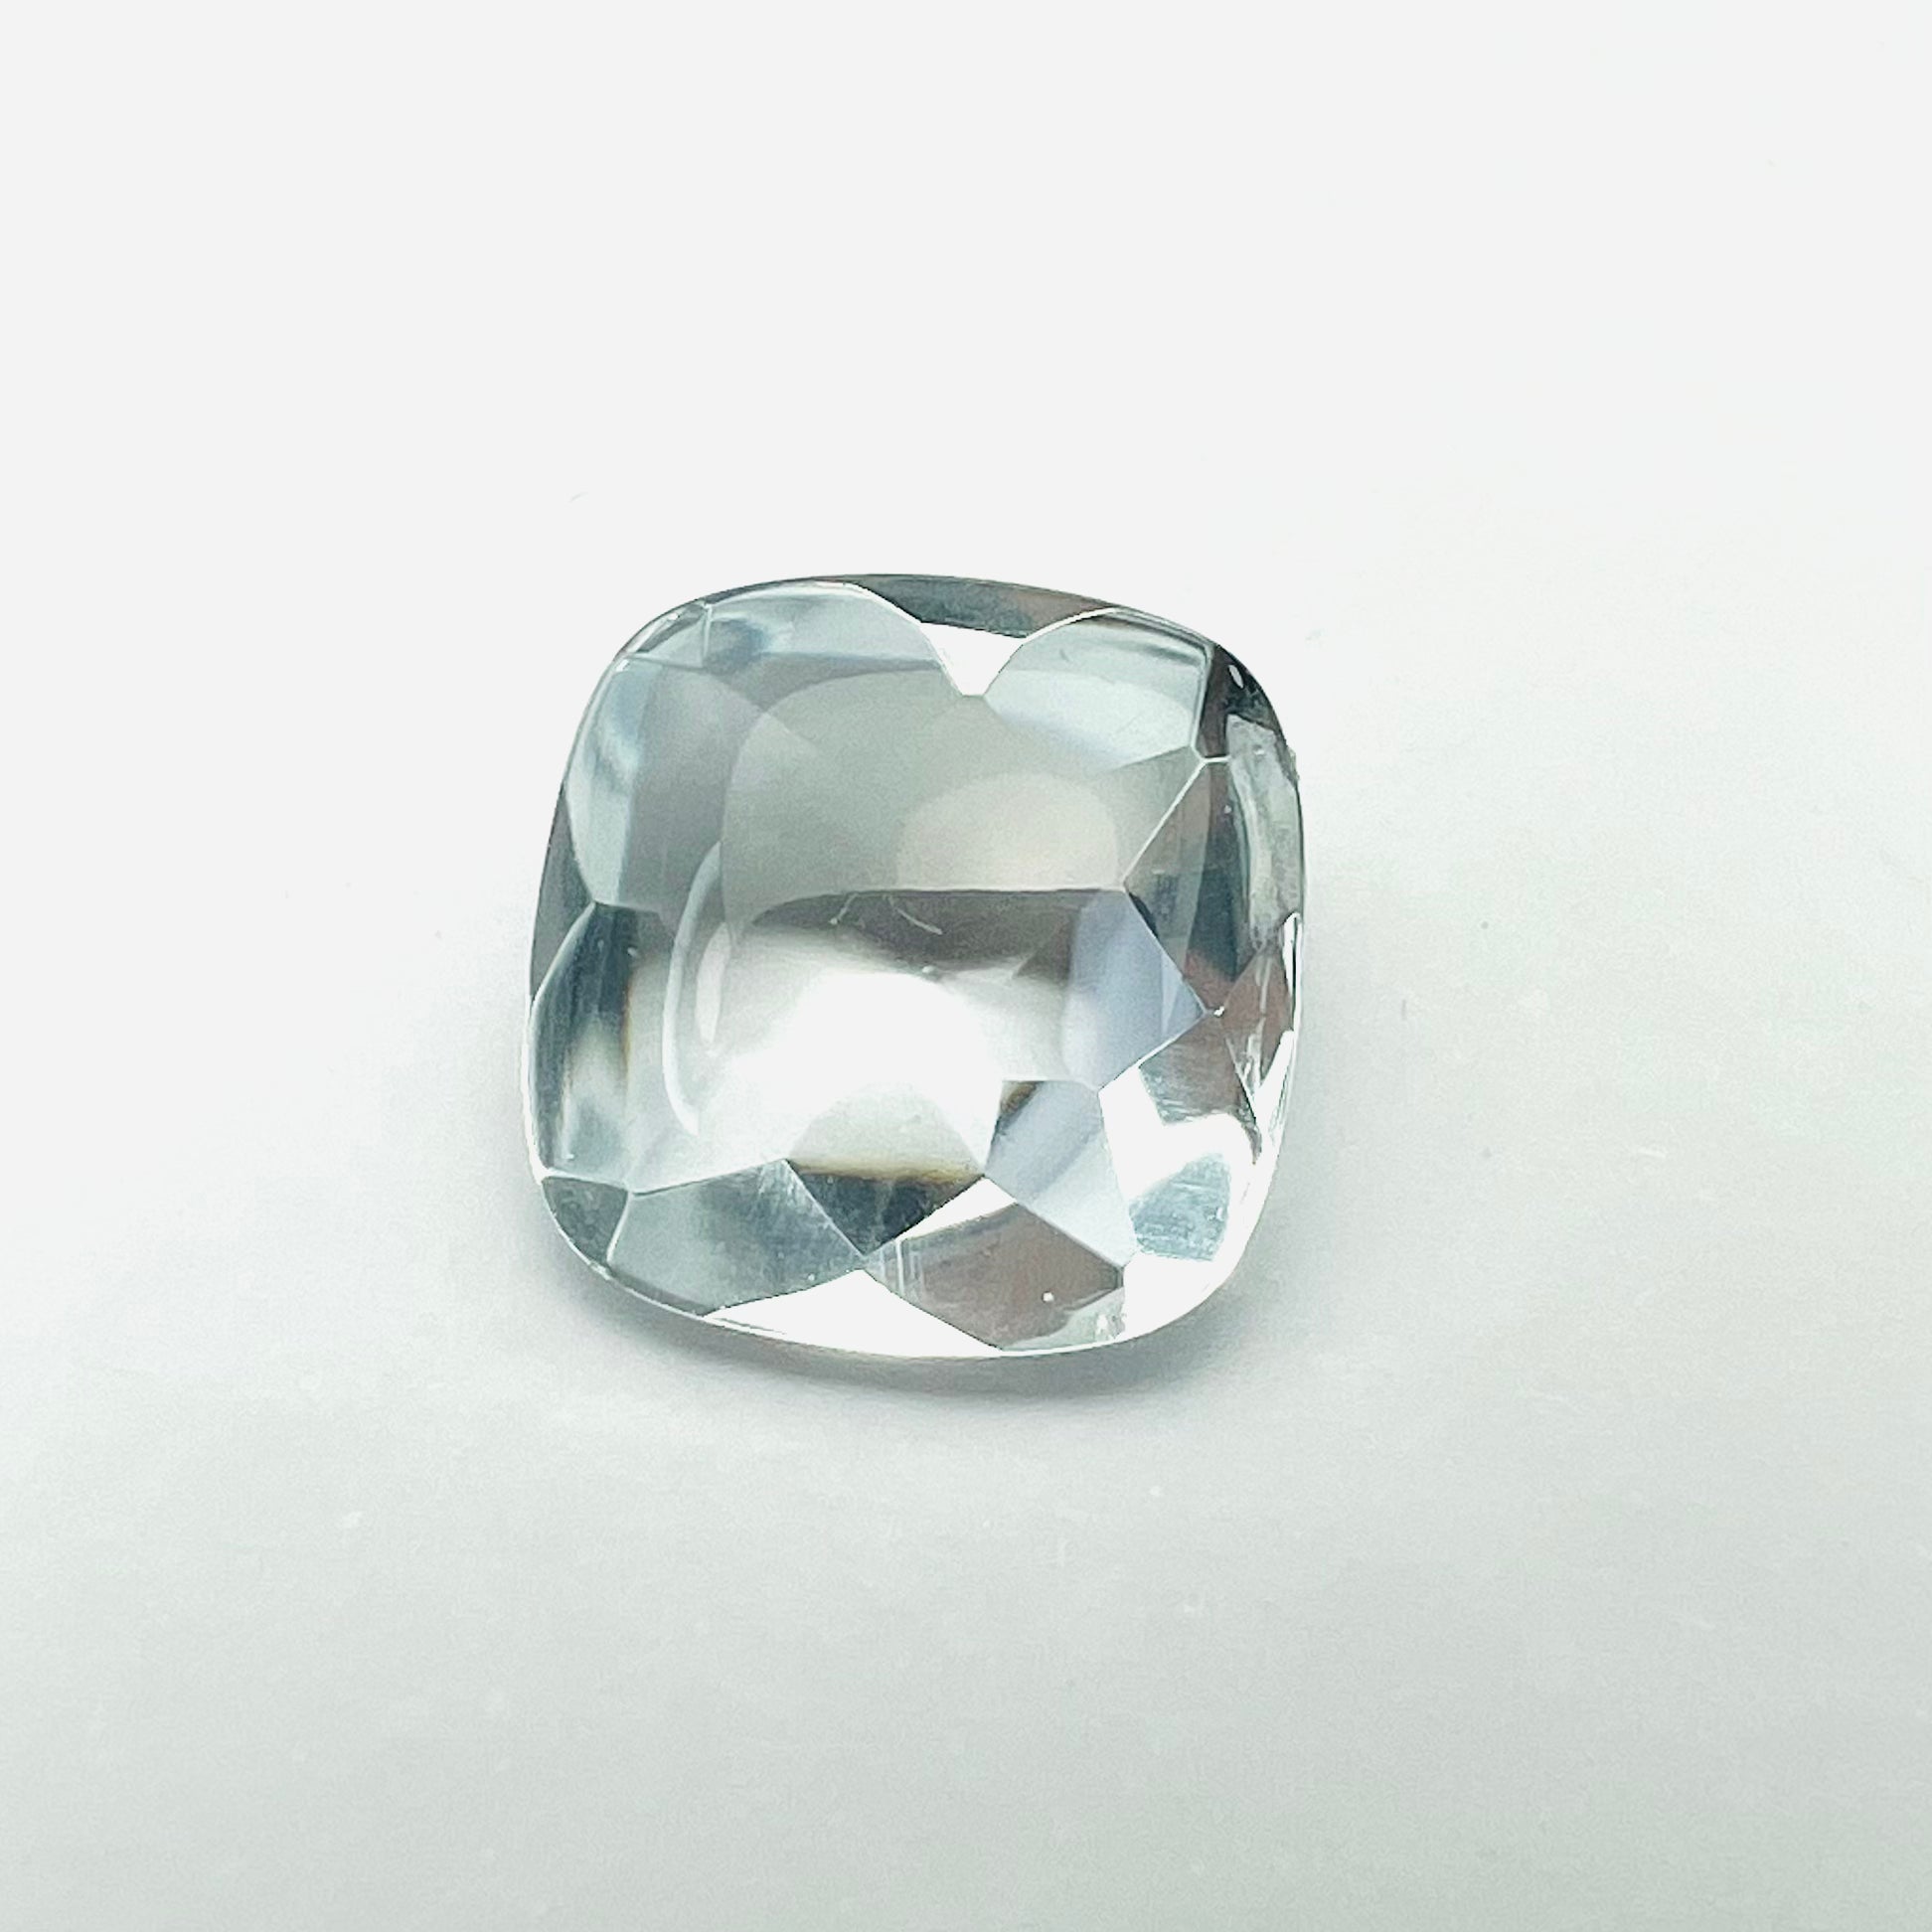 6.65CTW Loose Natural Square Cut Topaz 11.4x6.2mm Earth mined Gemstone